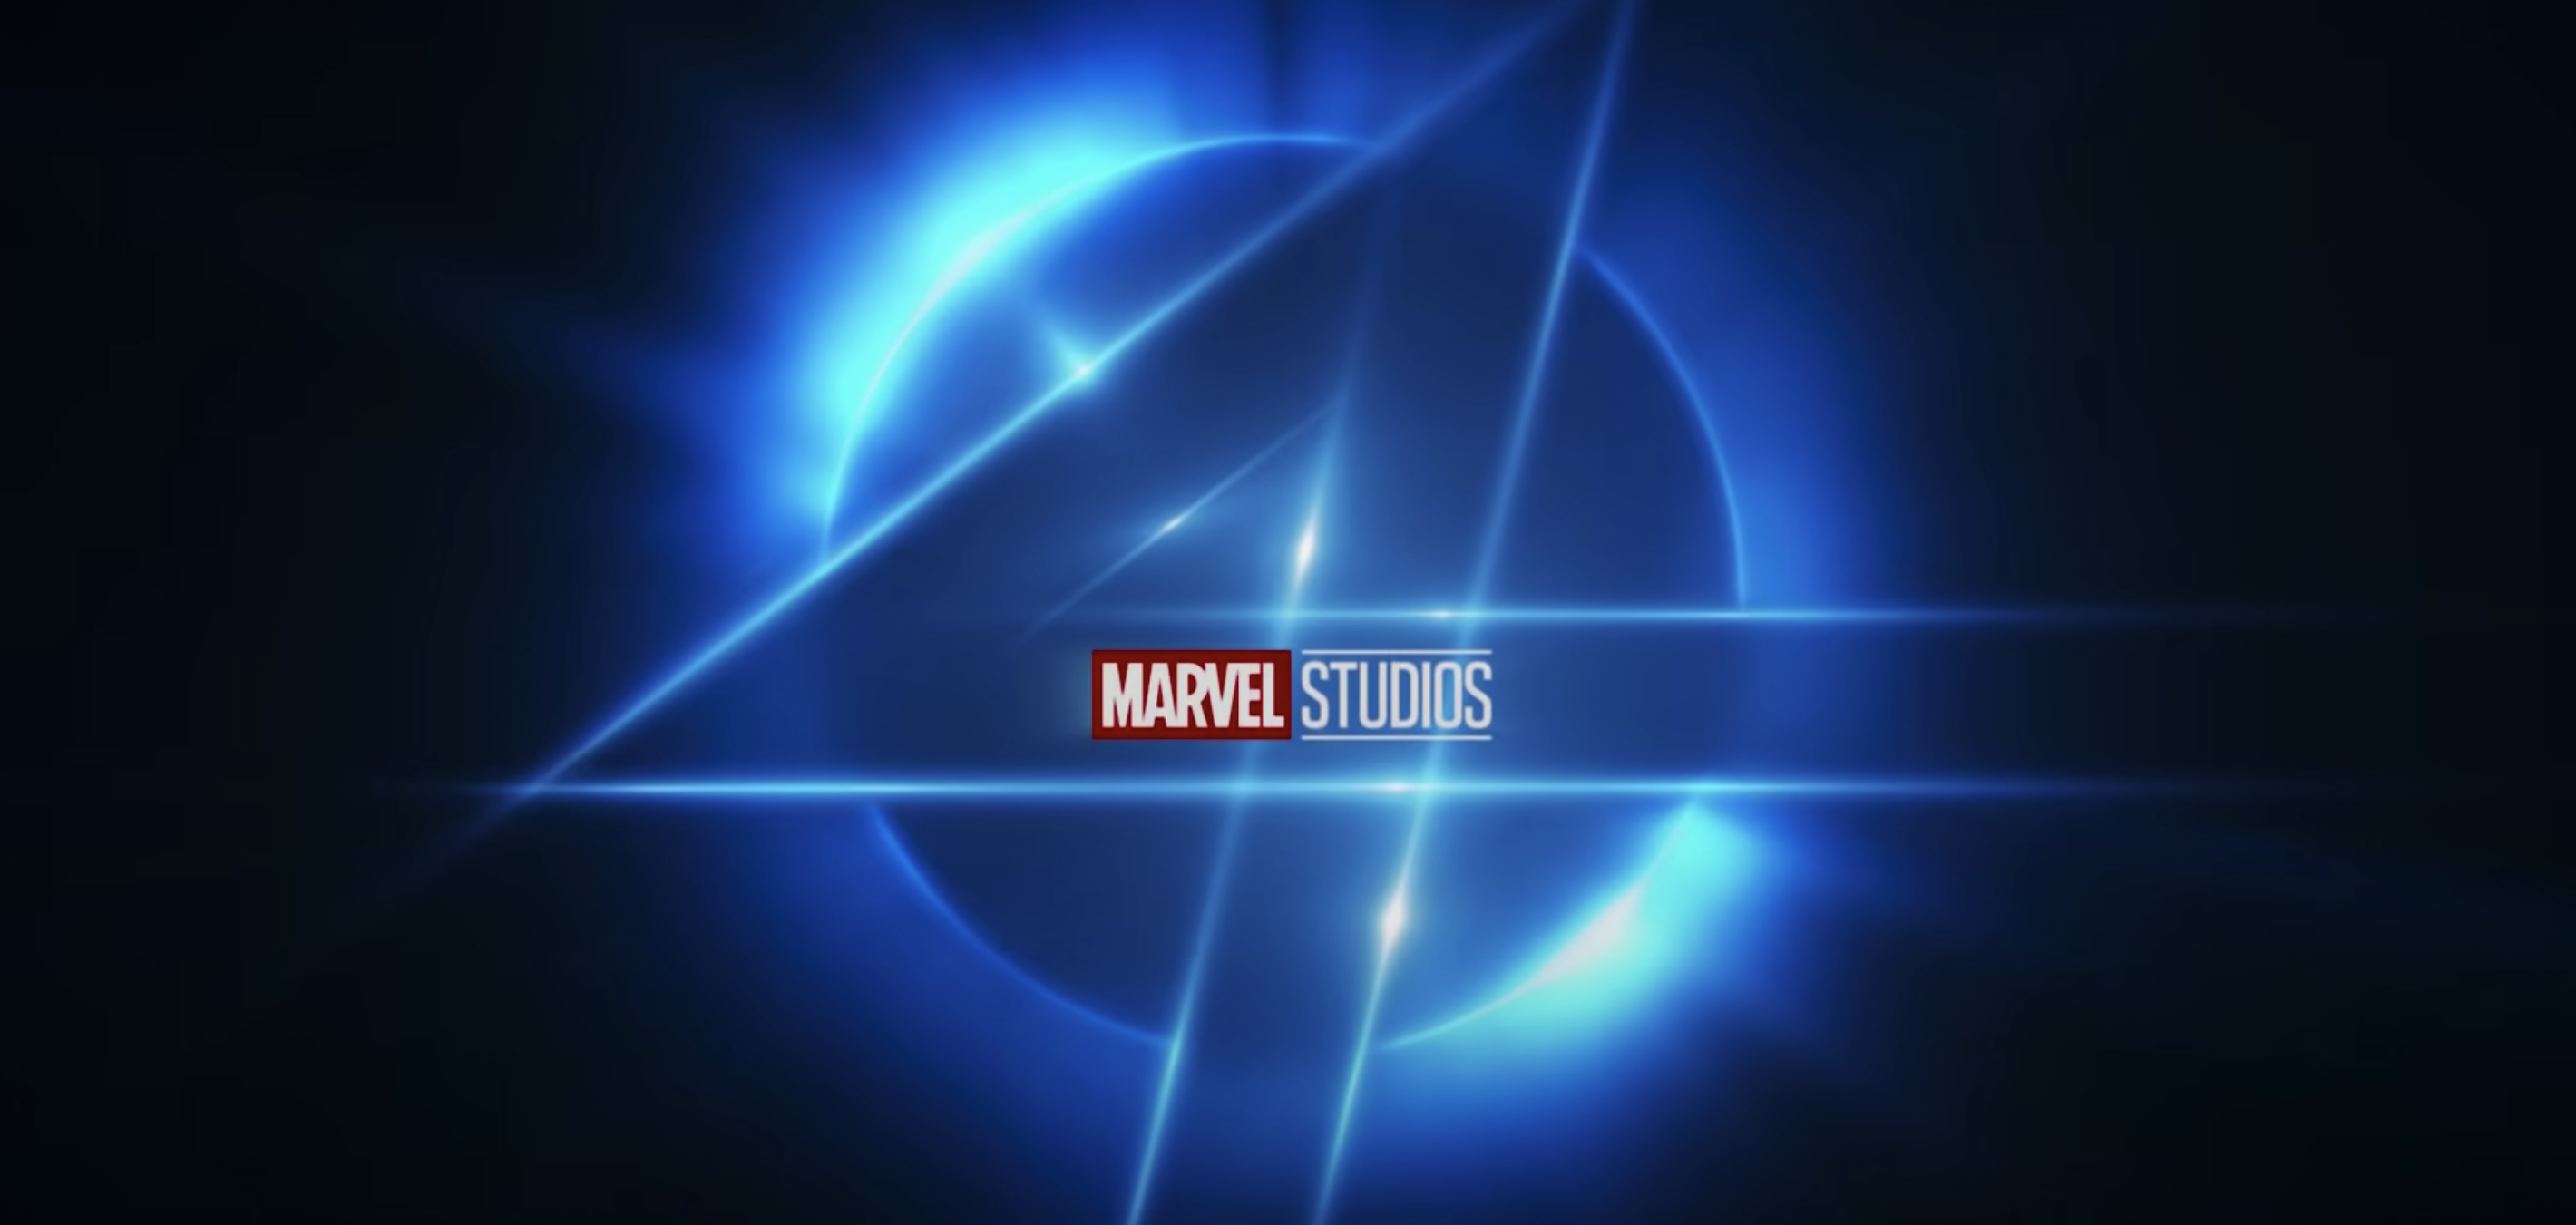 The logo for Fantastic Four, one of the upcoming marvel movies